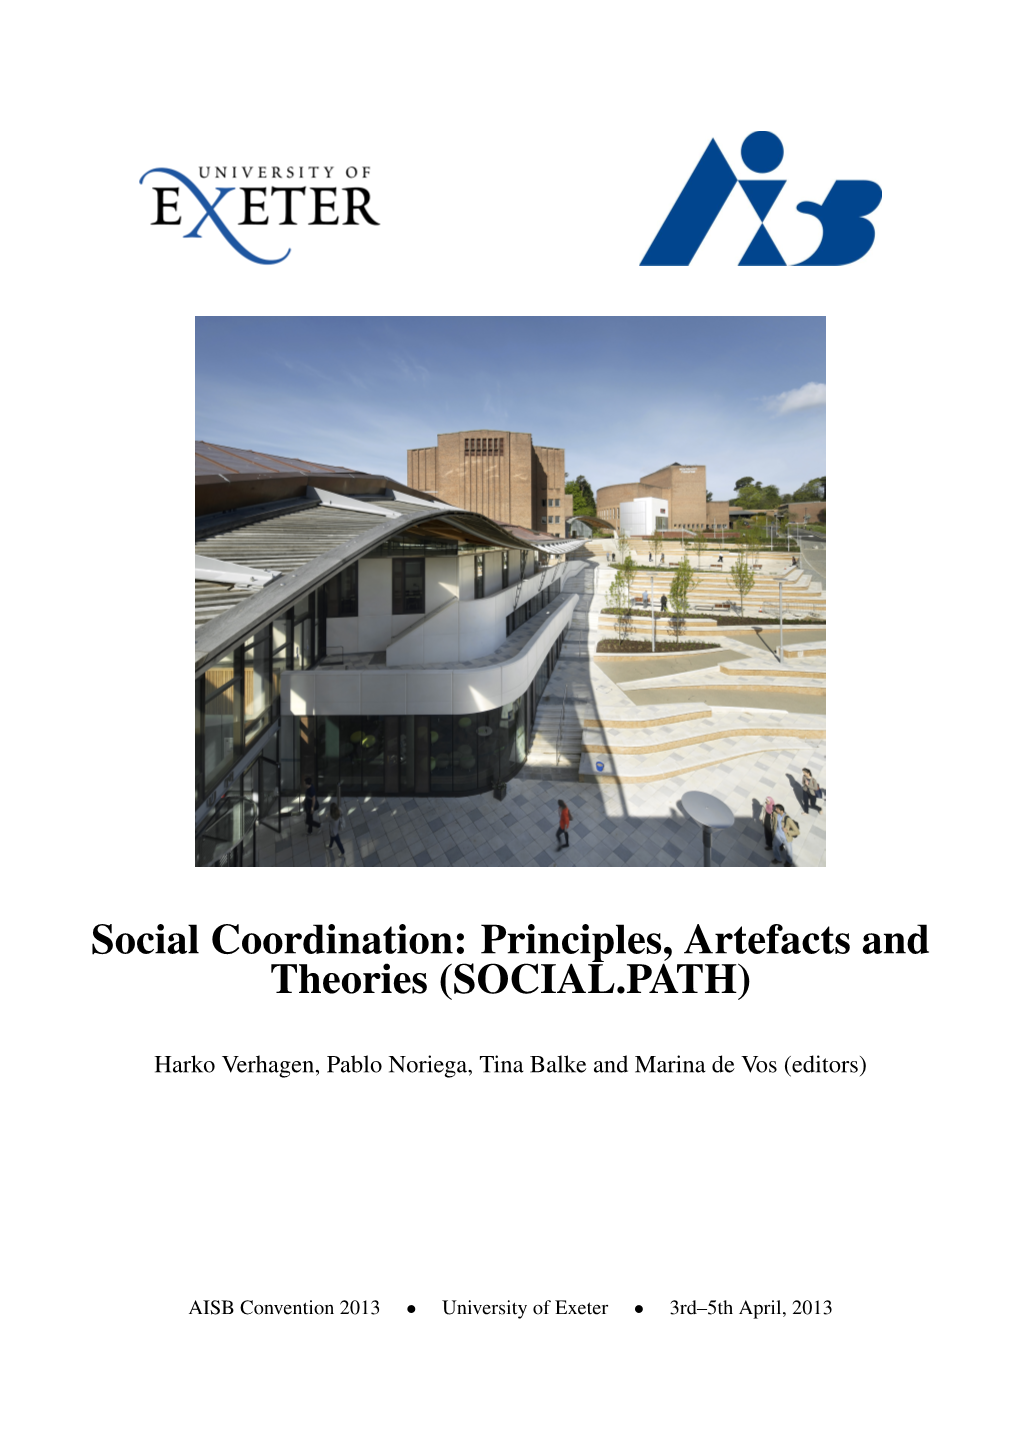 Social Coordination: Principles, Artefacts and Theories (SOCIAL.PATH)